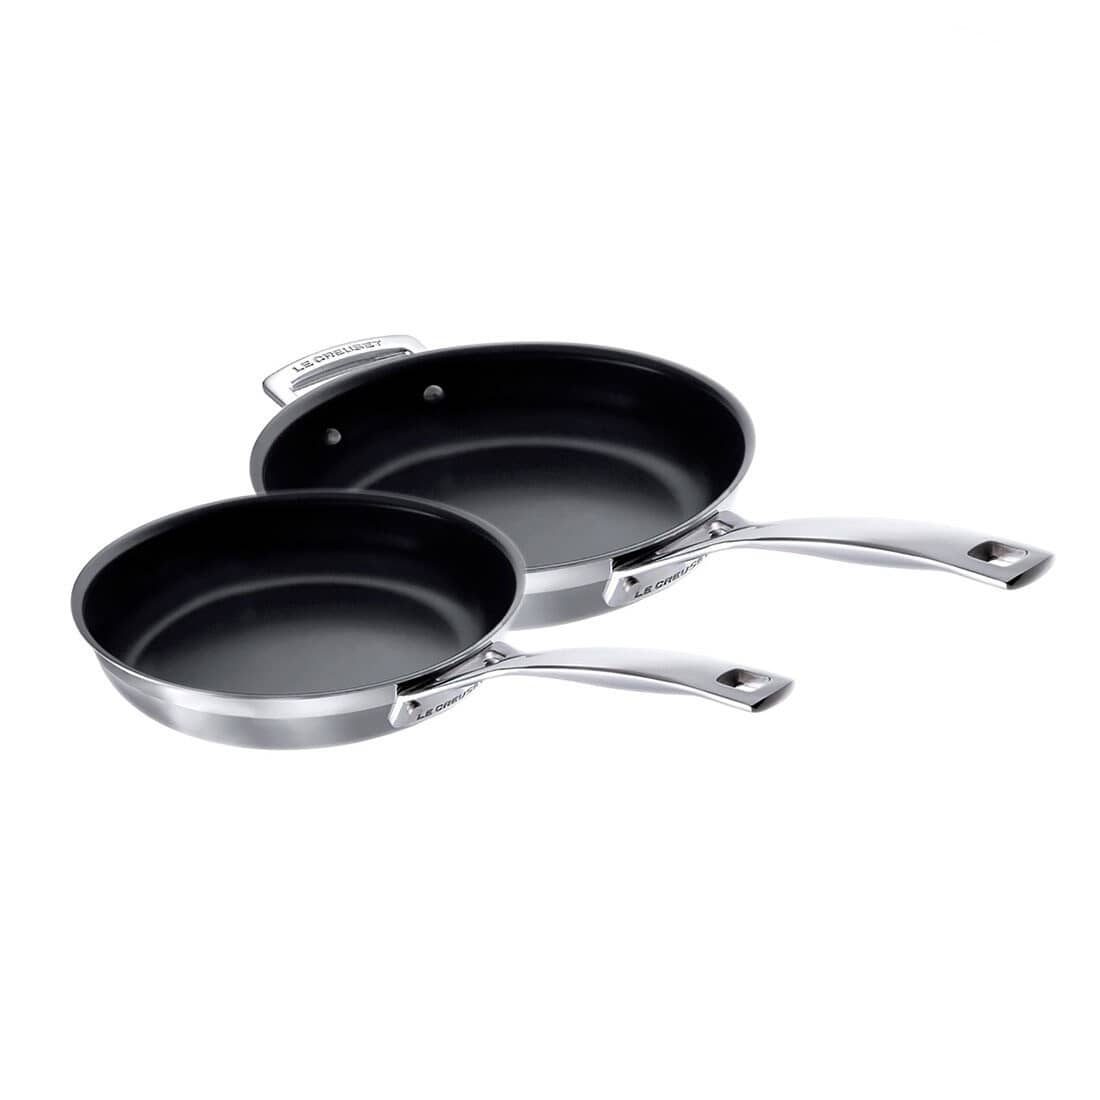 Le Creuset 3 Ply Stainless Steel 2 Piece Fry Pan Set (538010000000